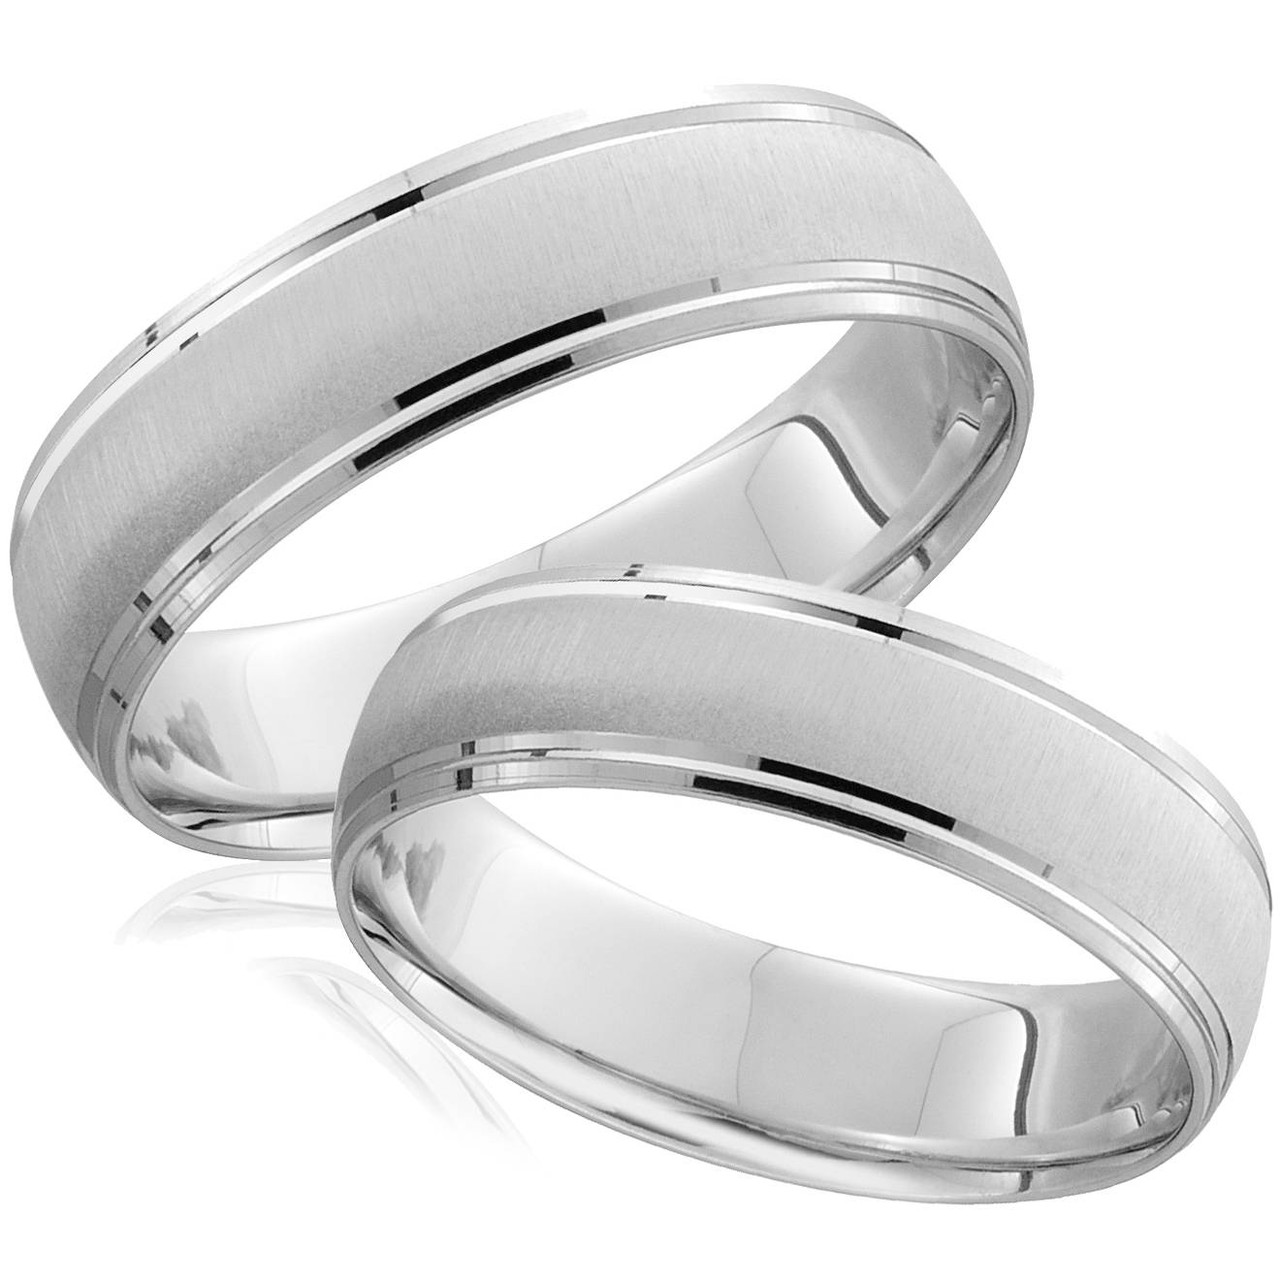 100S JEWELRY White Gold SandBlasted Finish Center Groove Tungsten Ring